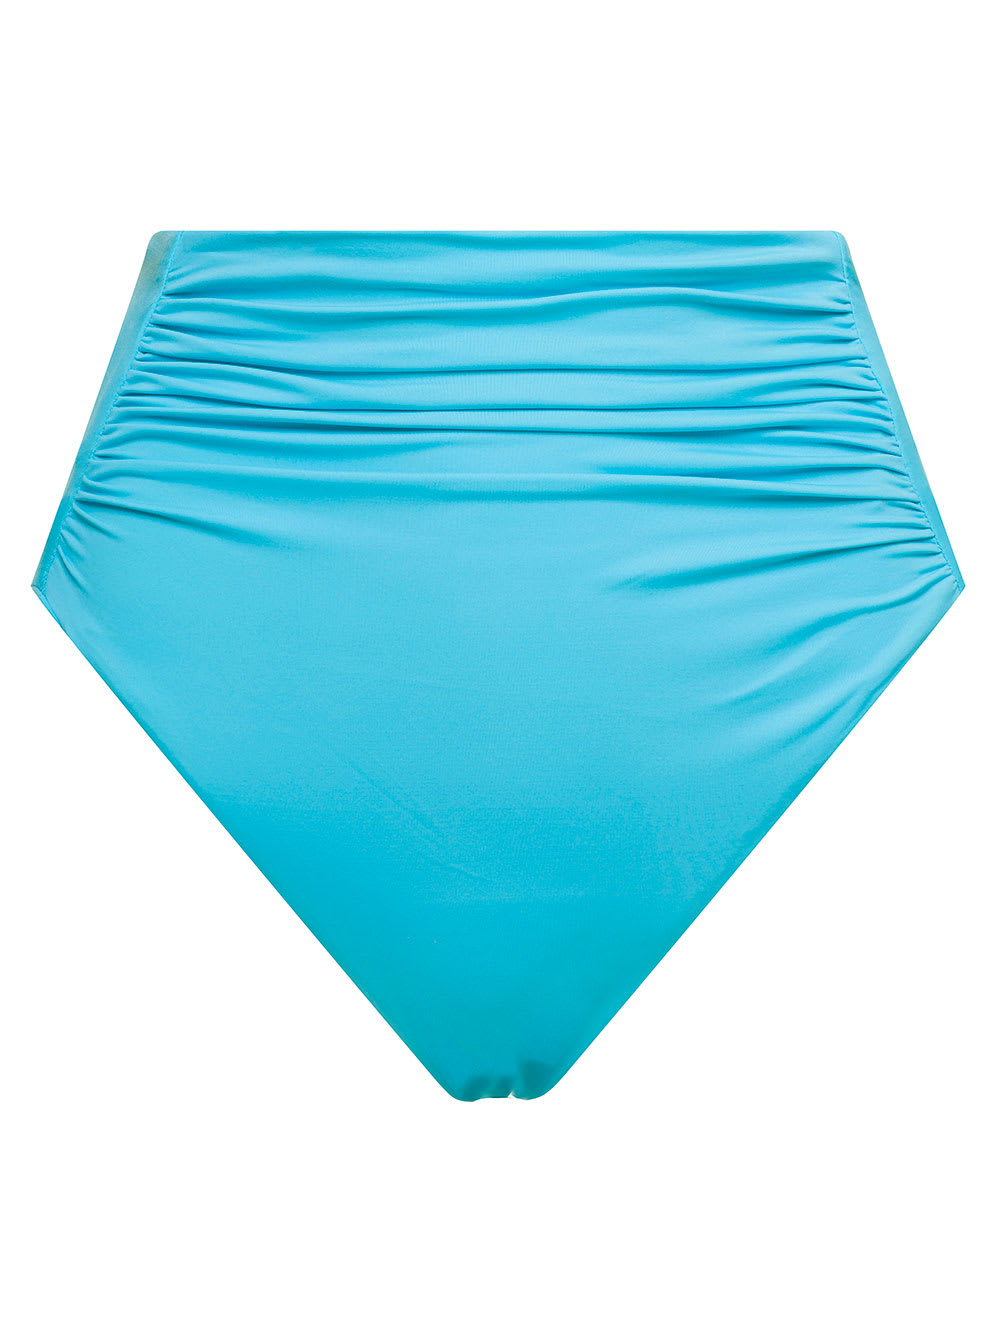 SELF-PORTRAIT HIGH WAISTED BIKINI BOTTOMS WITH RUCHED DETAILING IN TURQUOISE POLYAMIDE WOMAN